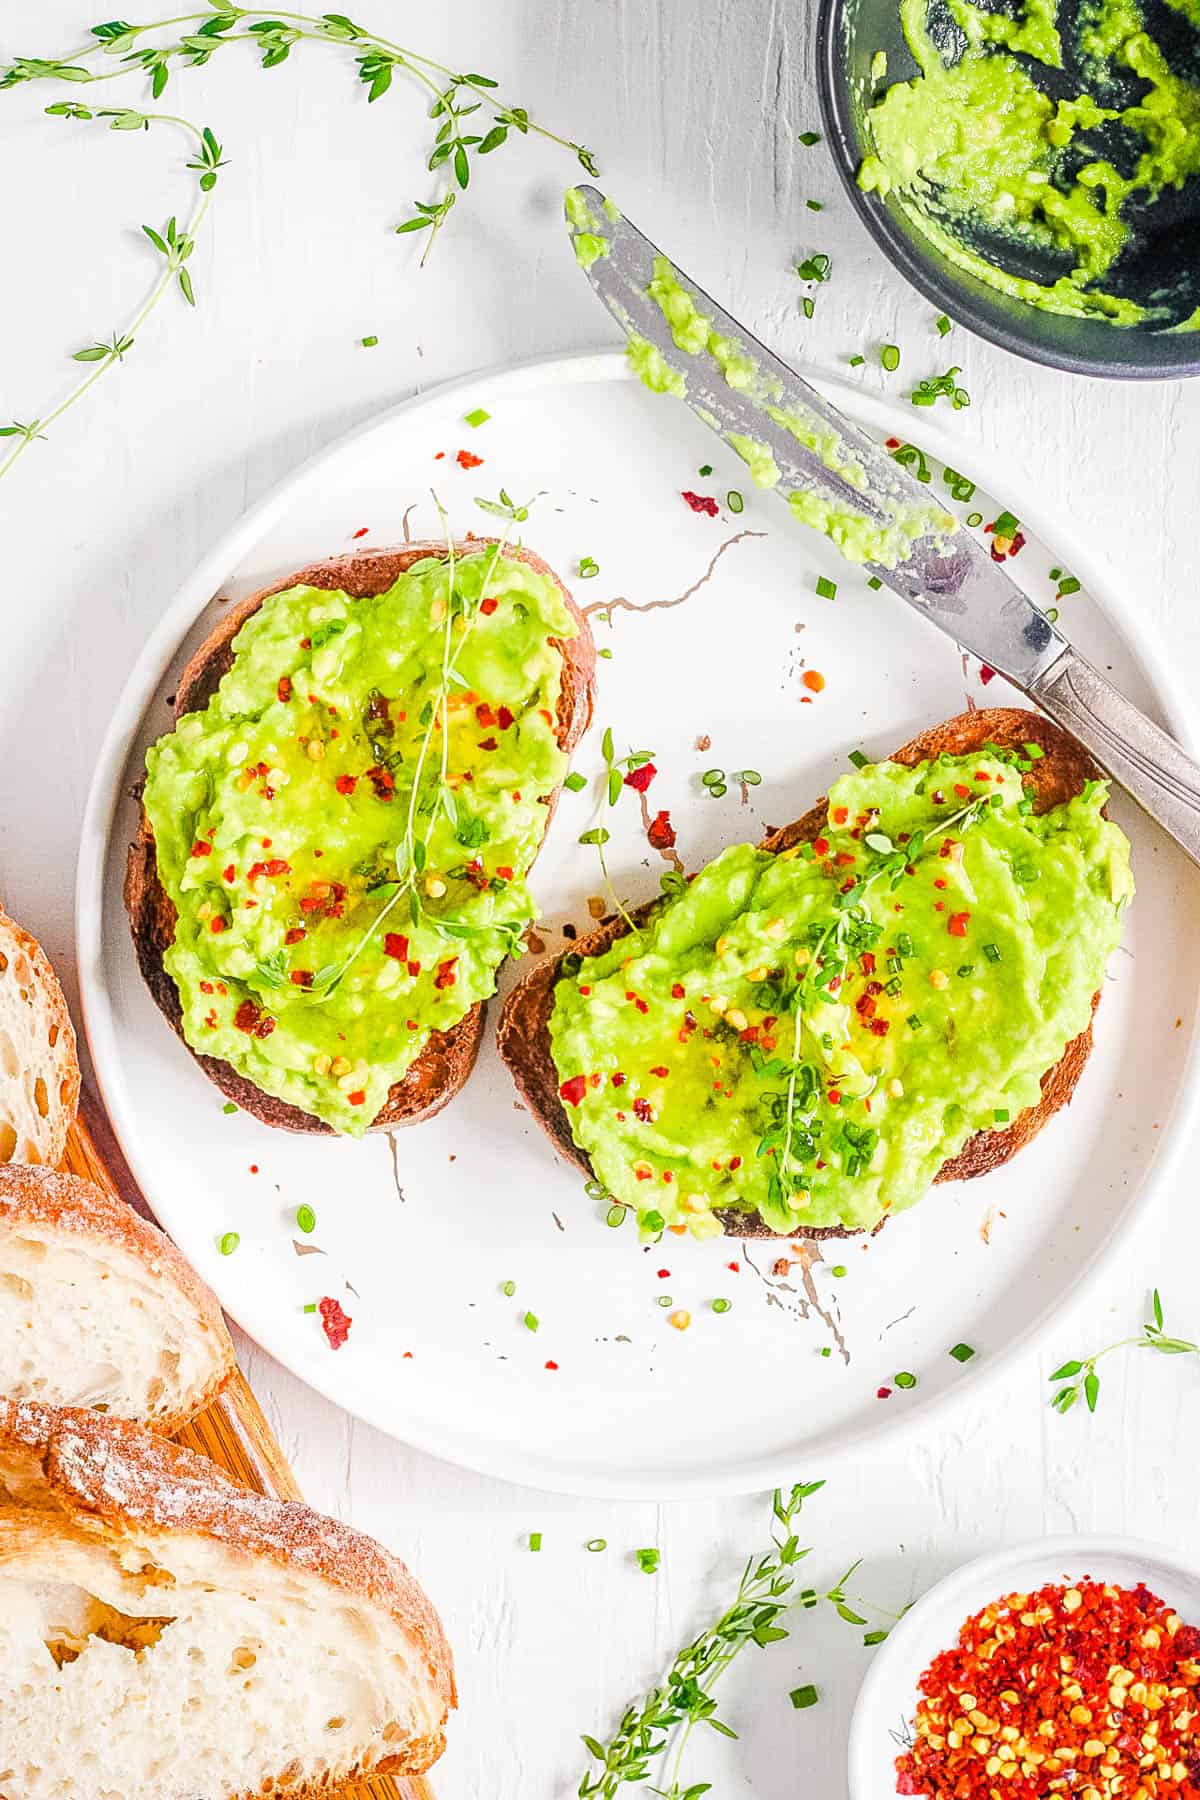 Avocado Toast With Honey | The Picky Eater [Video]